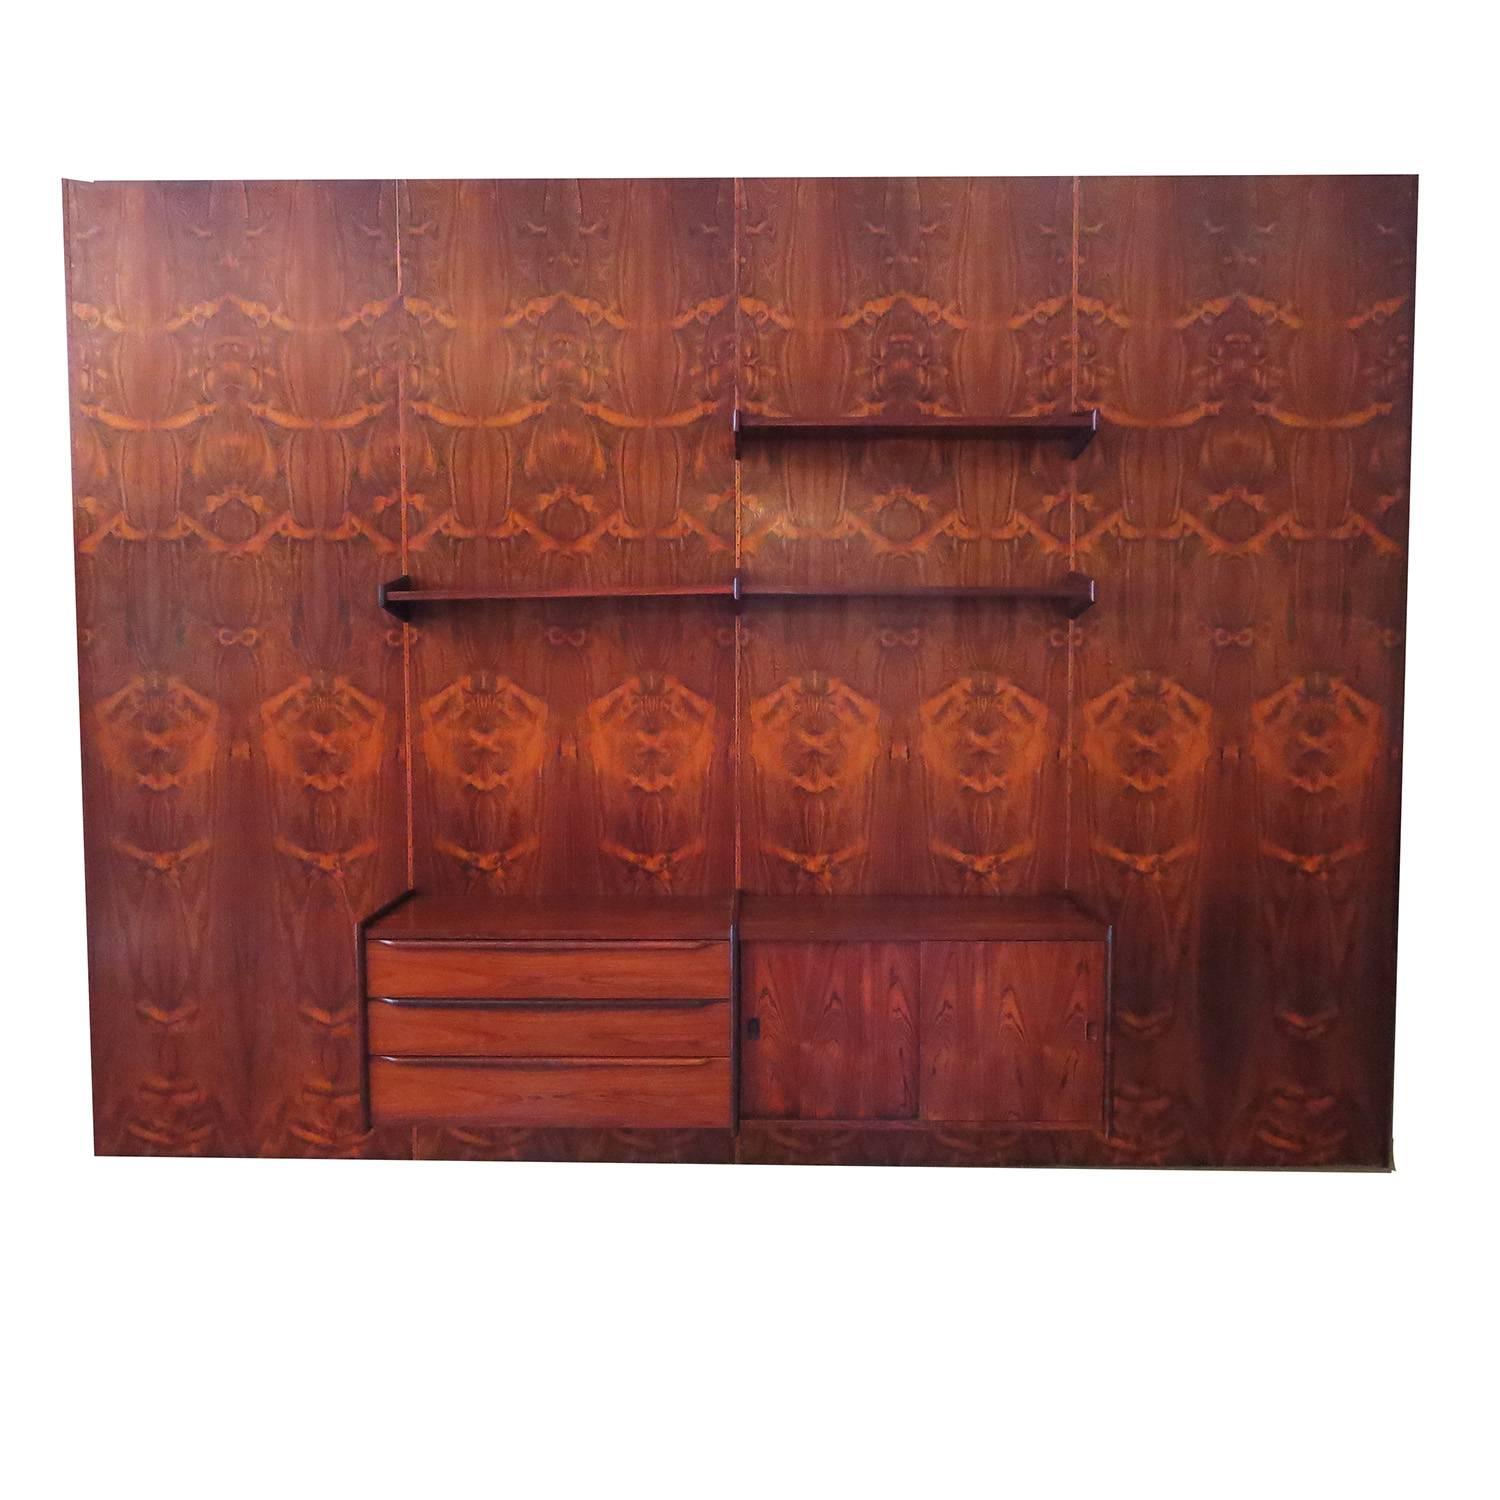 There are a few of these European wall units that have come on the market, but none that can equal the beautiful grain pattern of this rosewood. The unit consists of four bookmatched panels of highly figured rosewood, plus a thinner panel (not